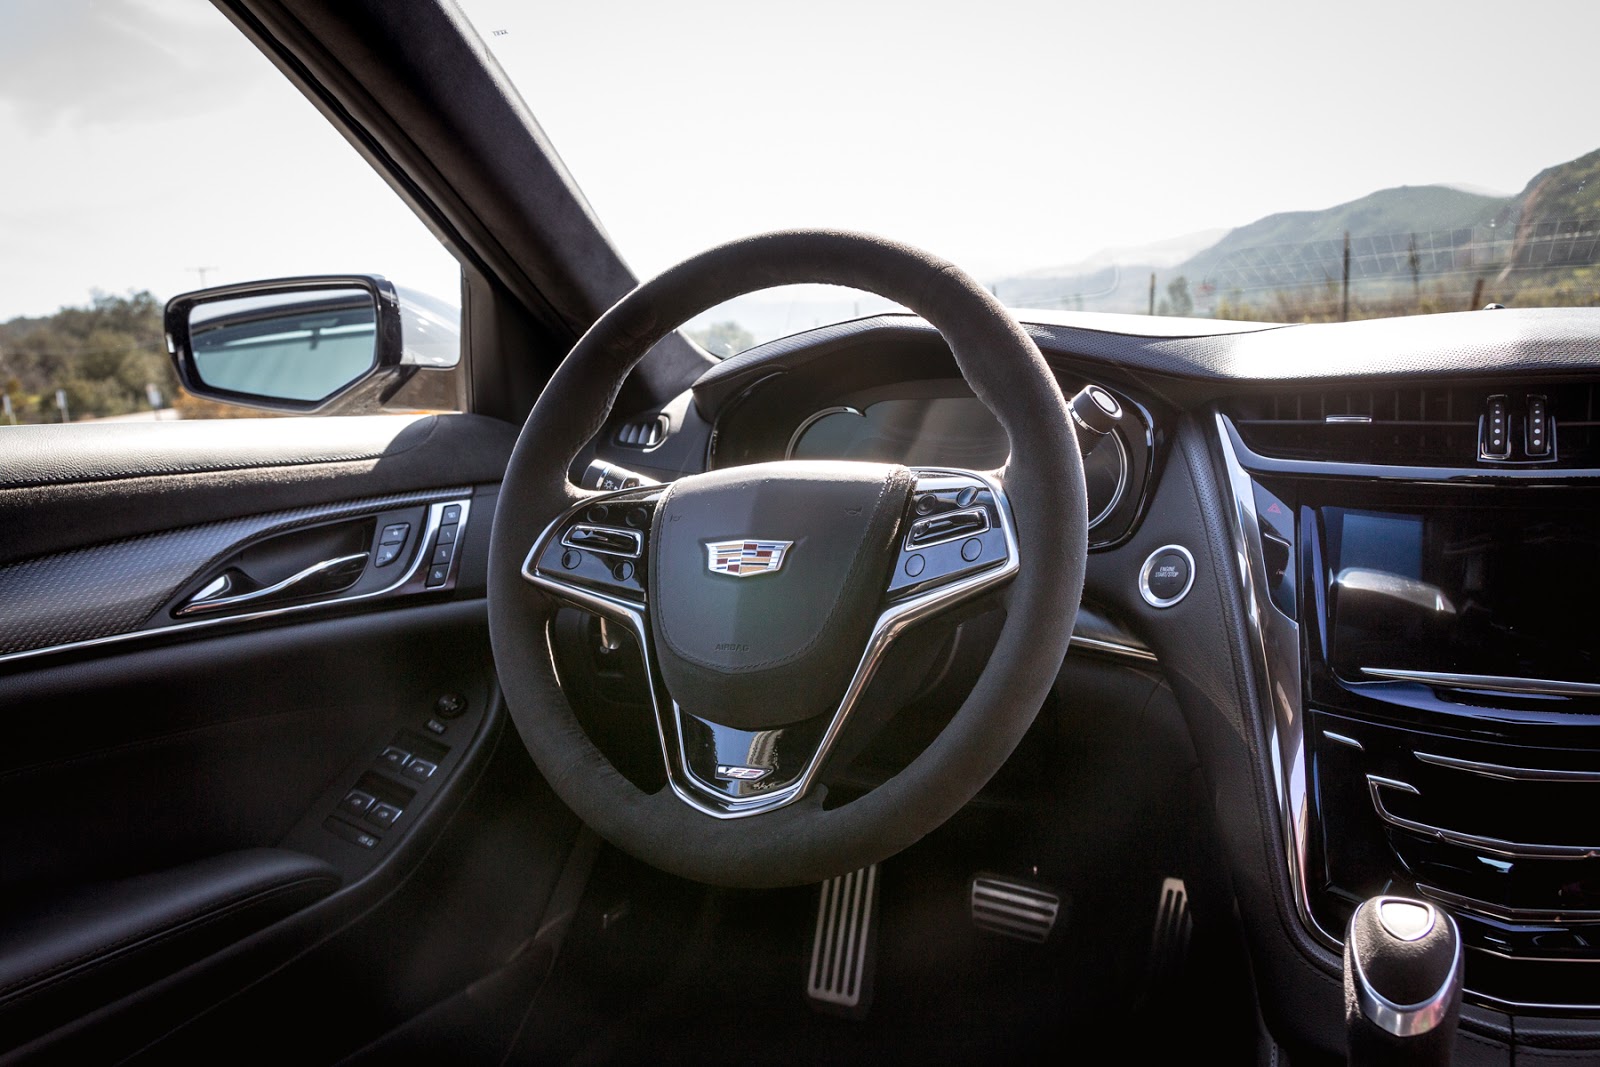 2017 Cadillac Cts V Review All About Otomotif